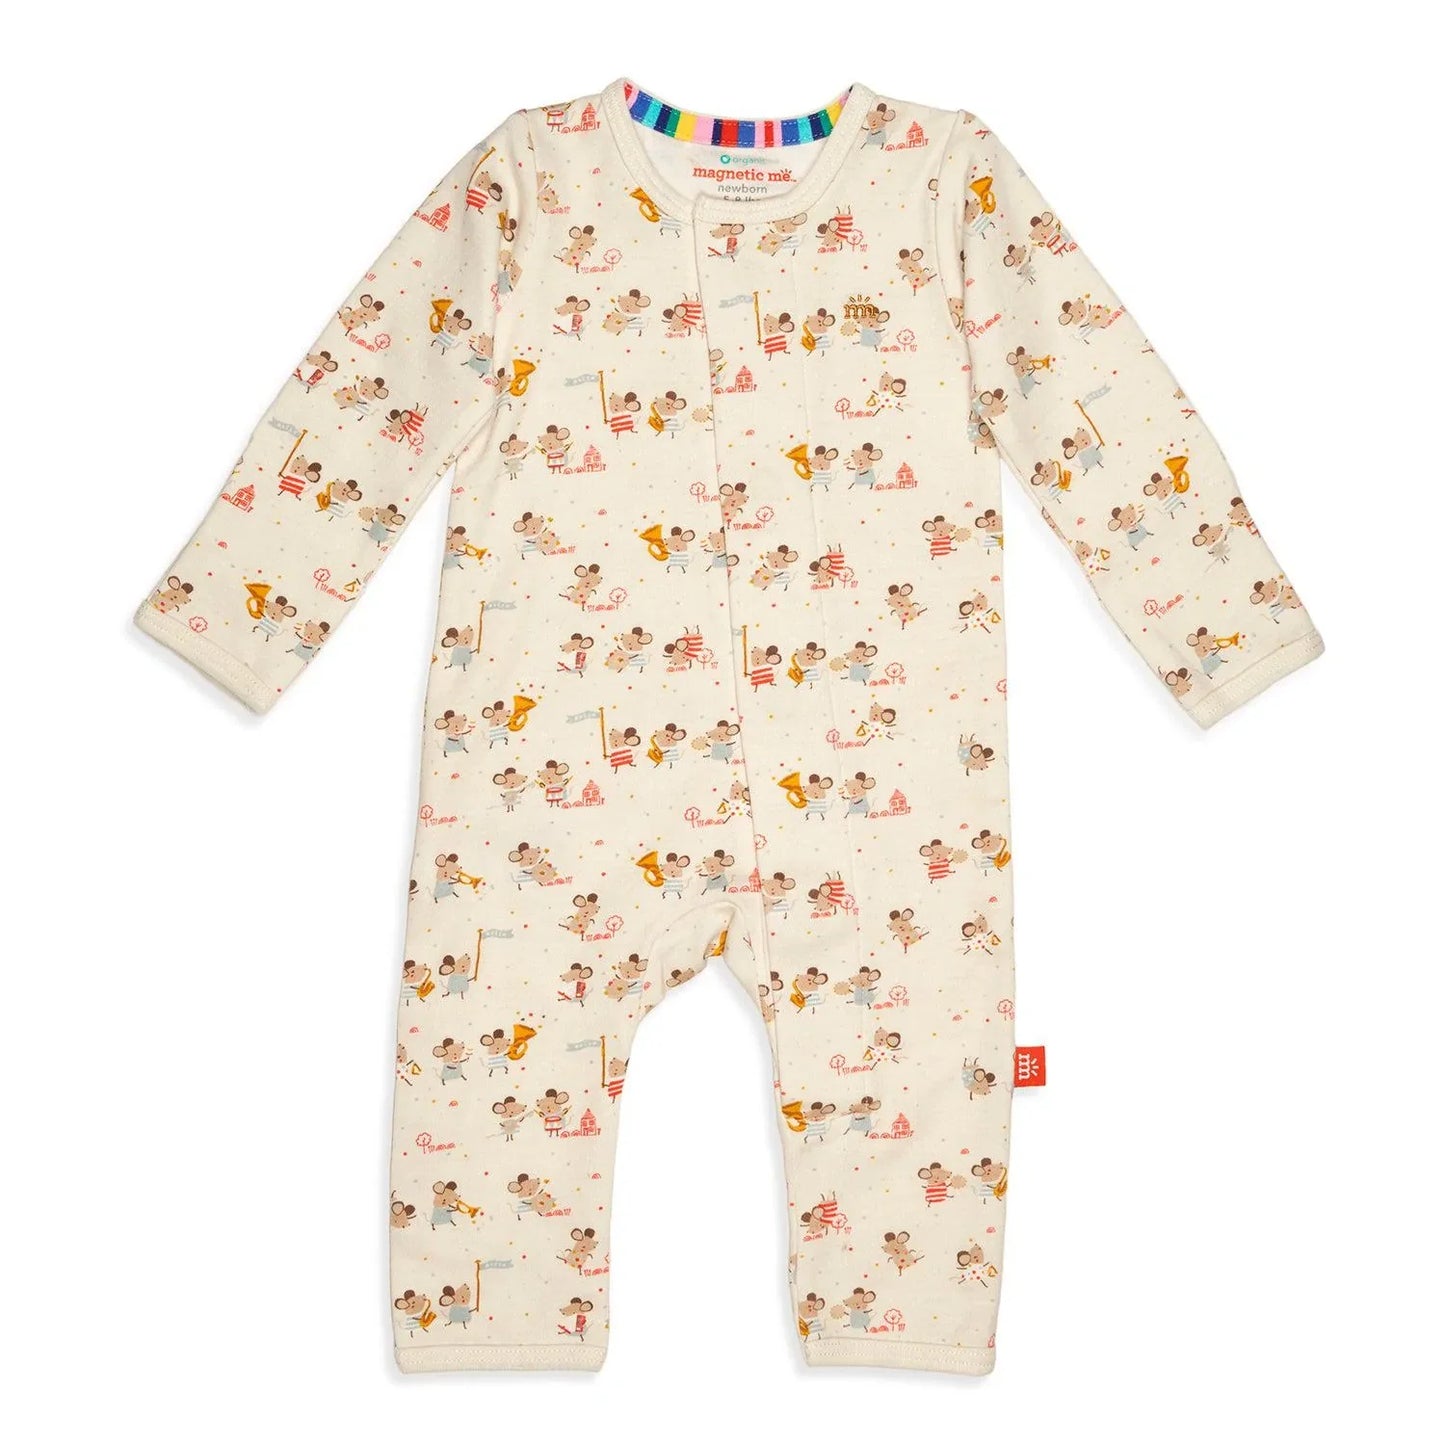 MAGNETIC ME OF MICE & BAND ORGANIC COTTON COVERALL